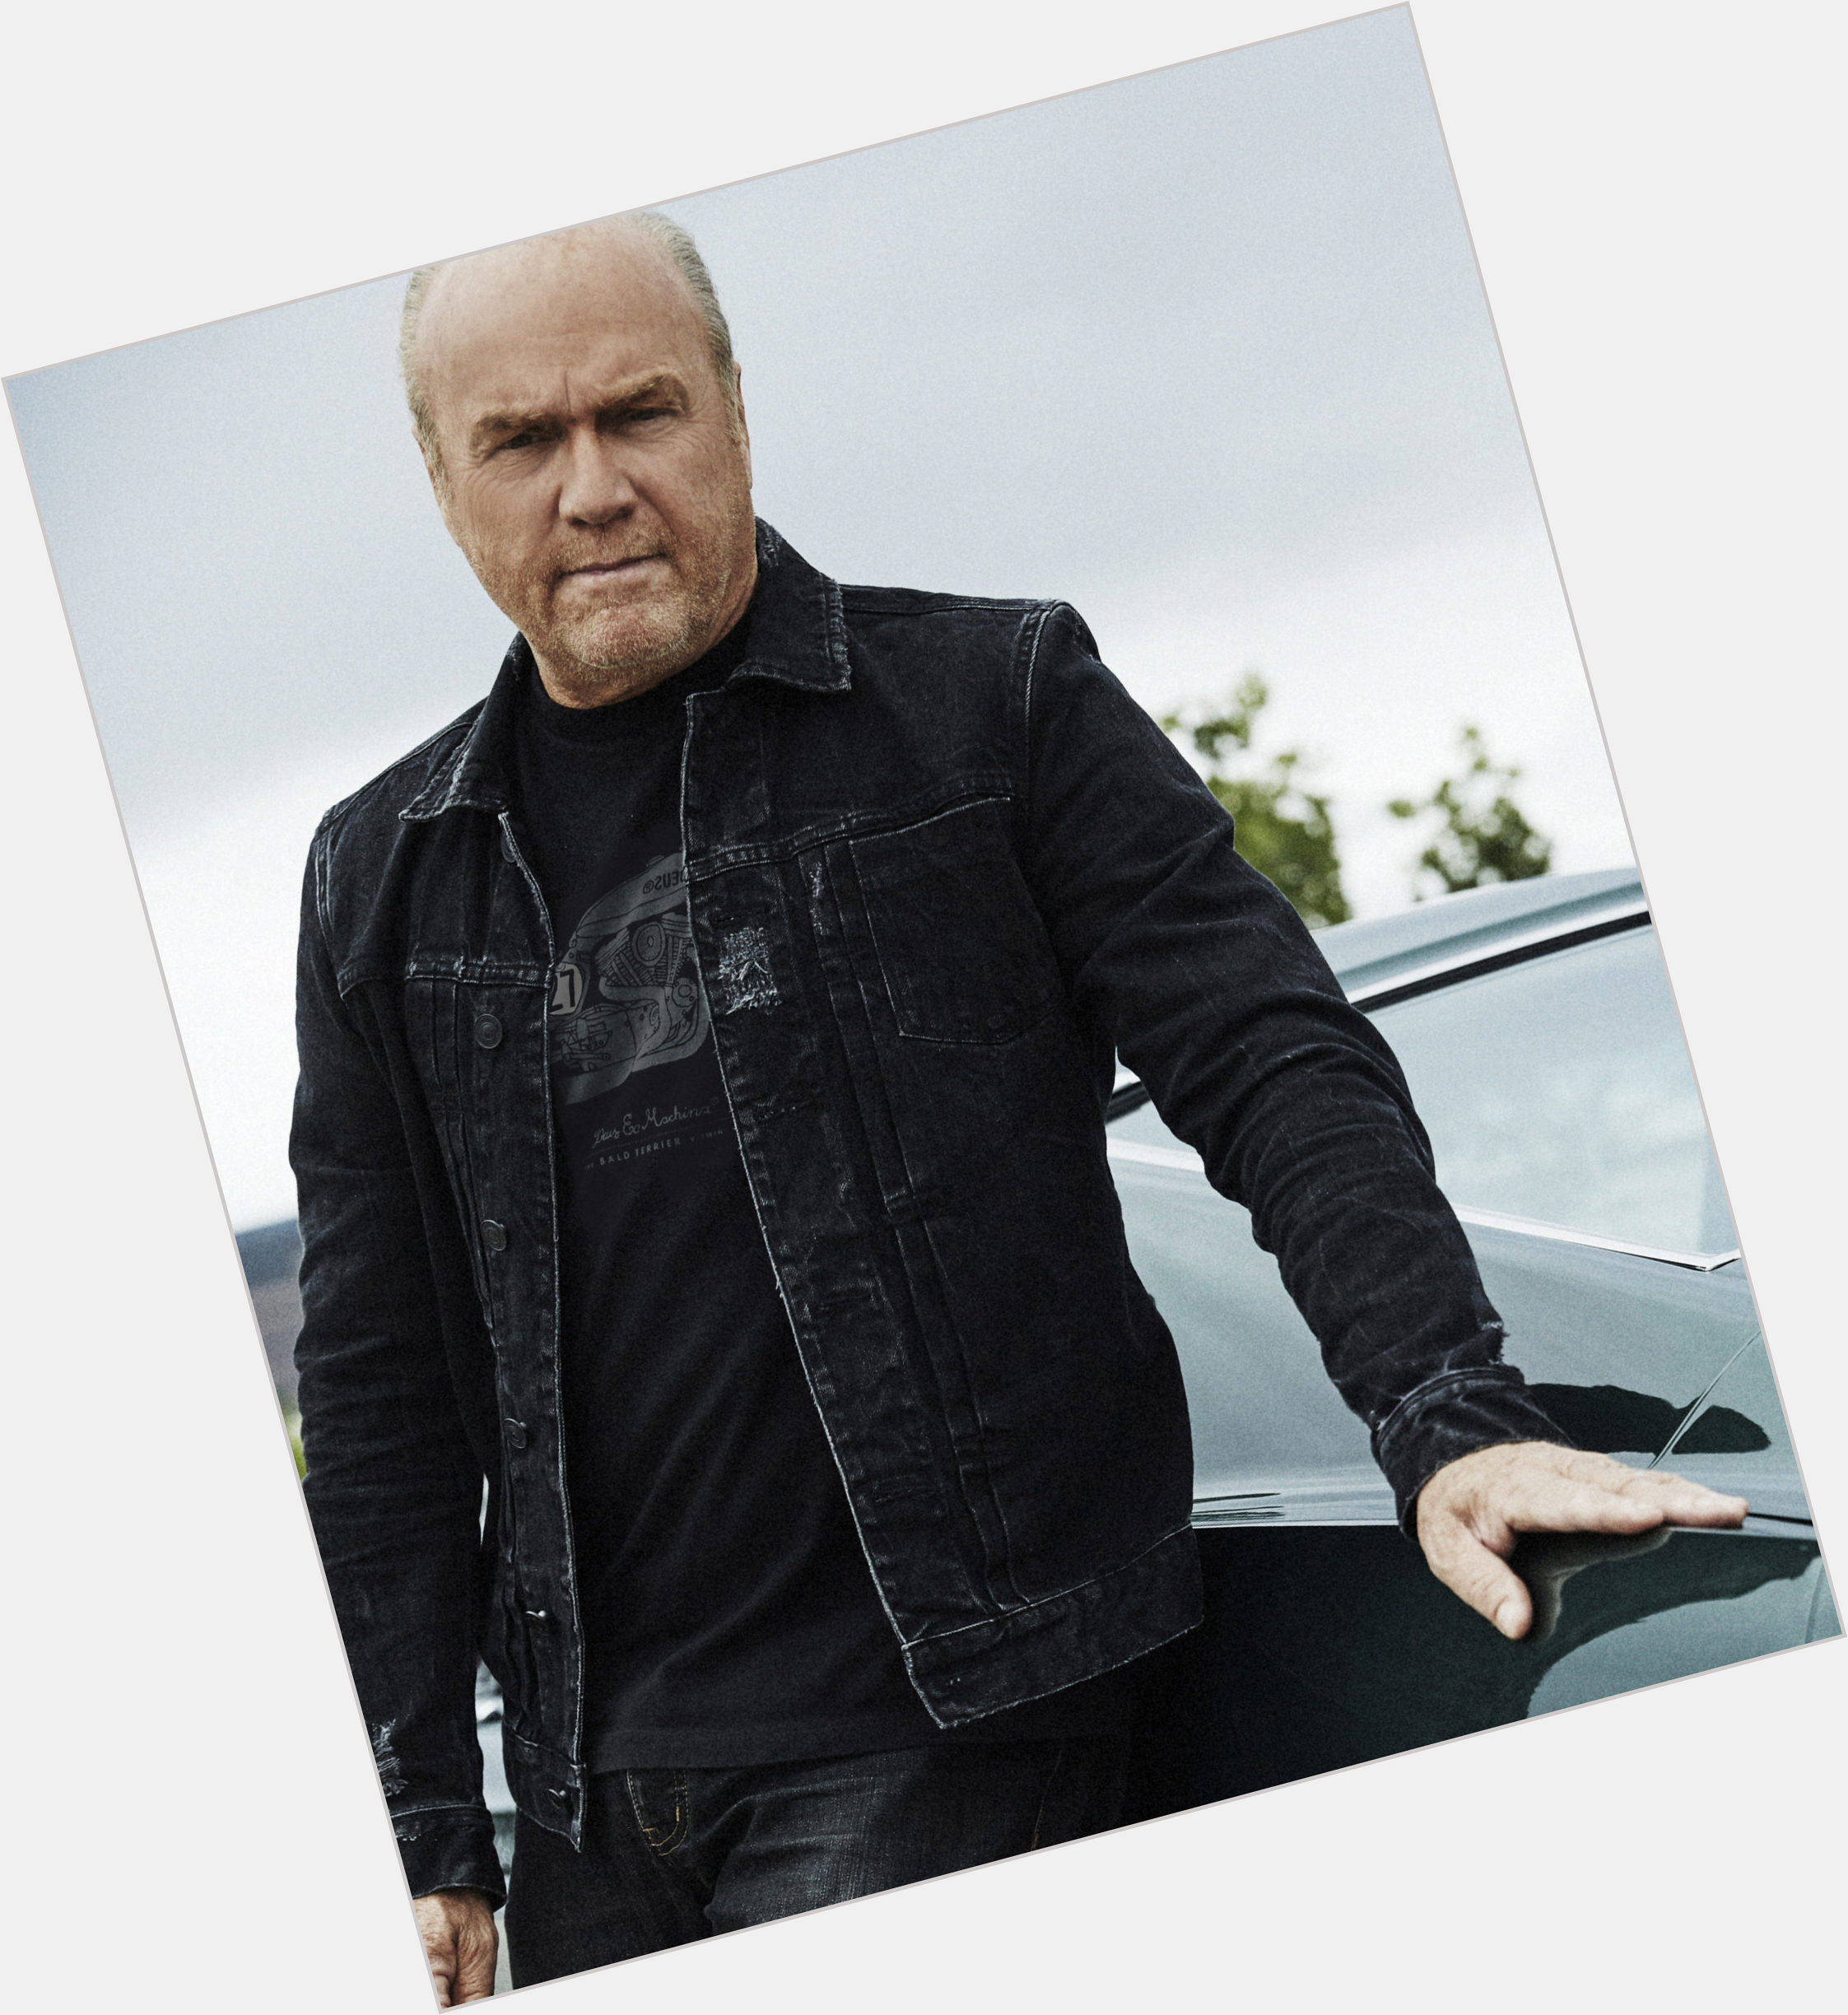 Greg Laurie hairstyle 3